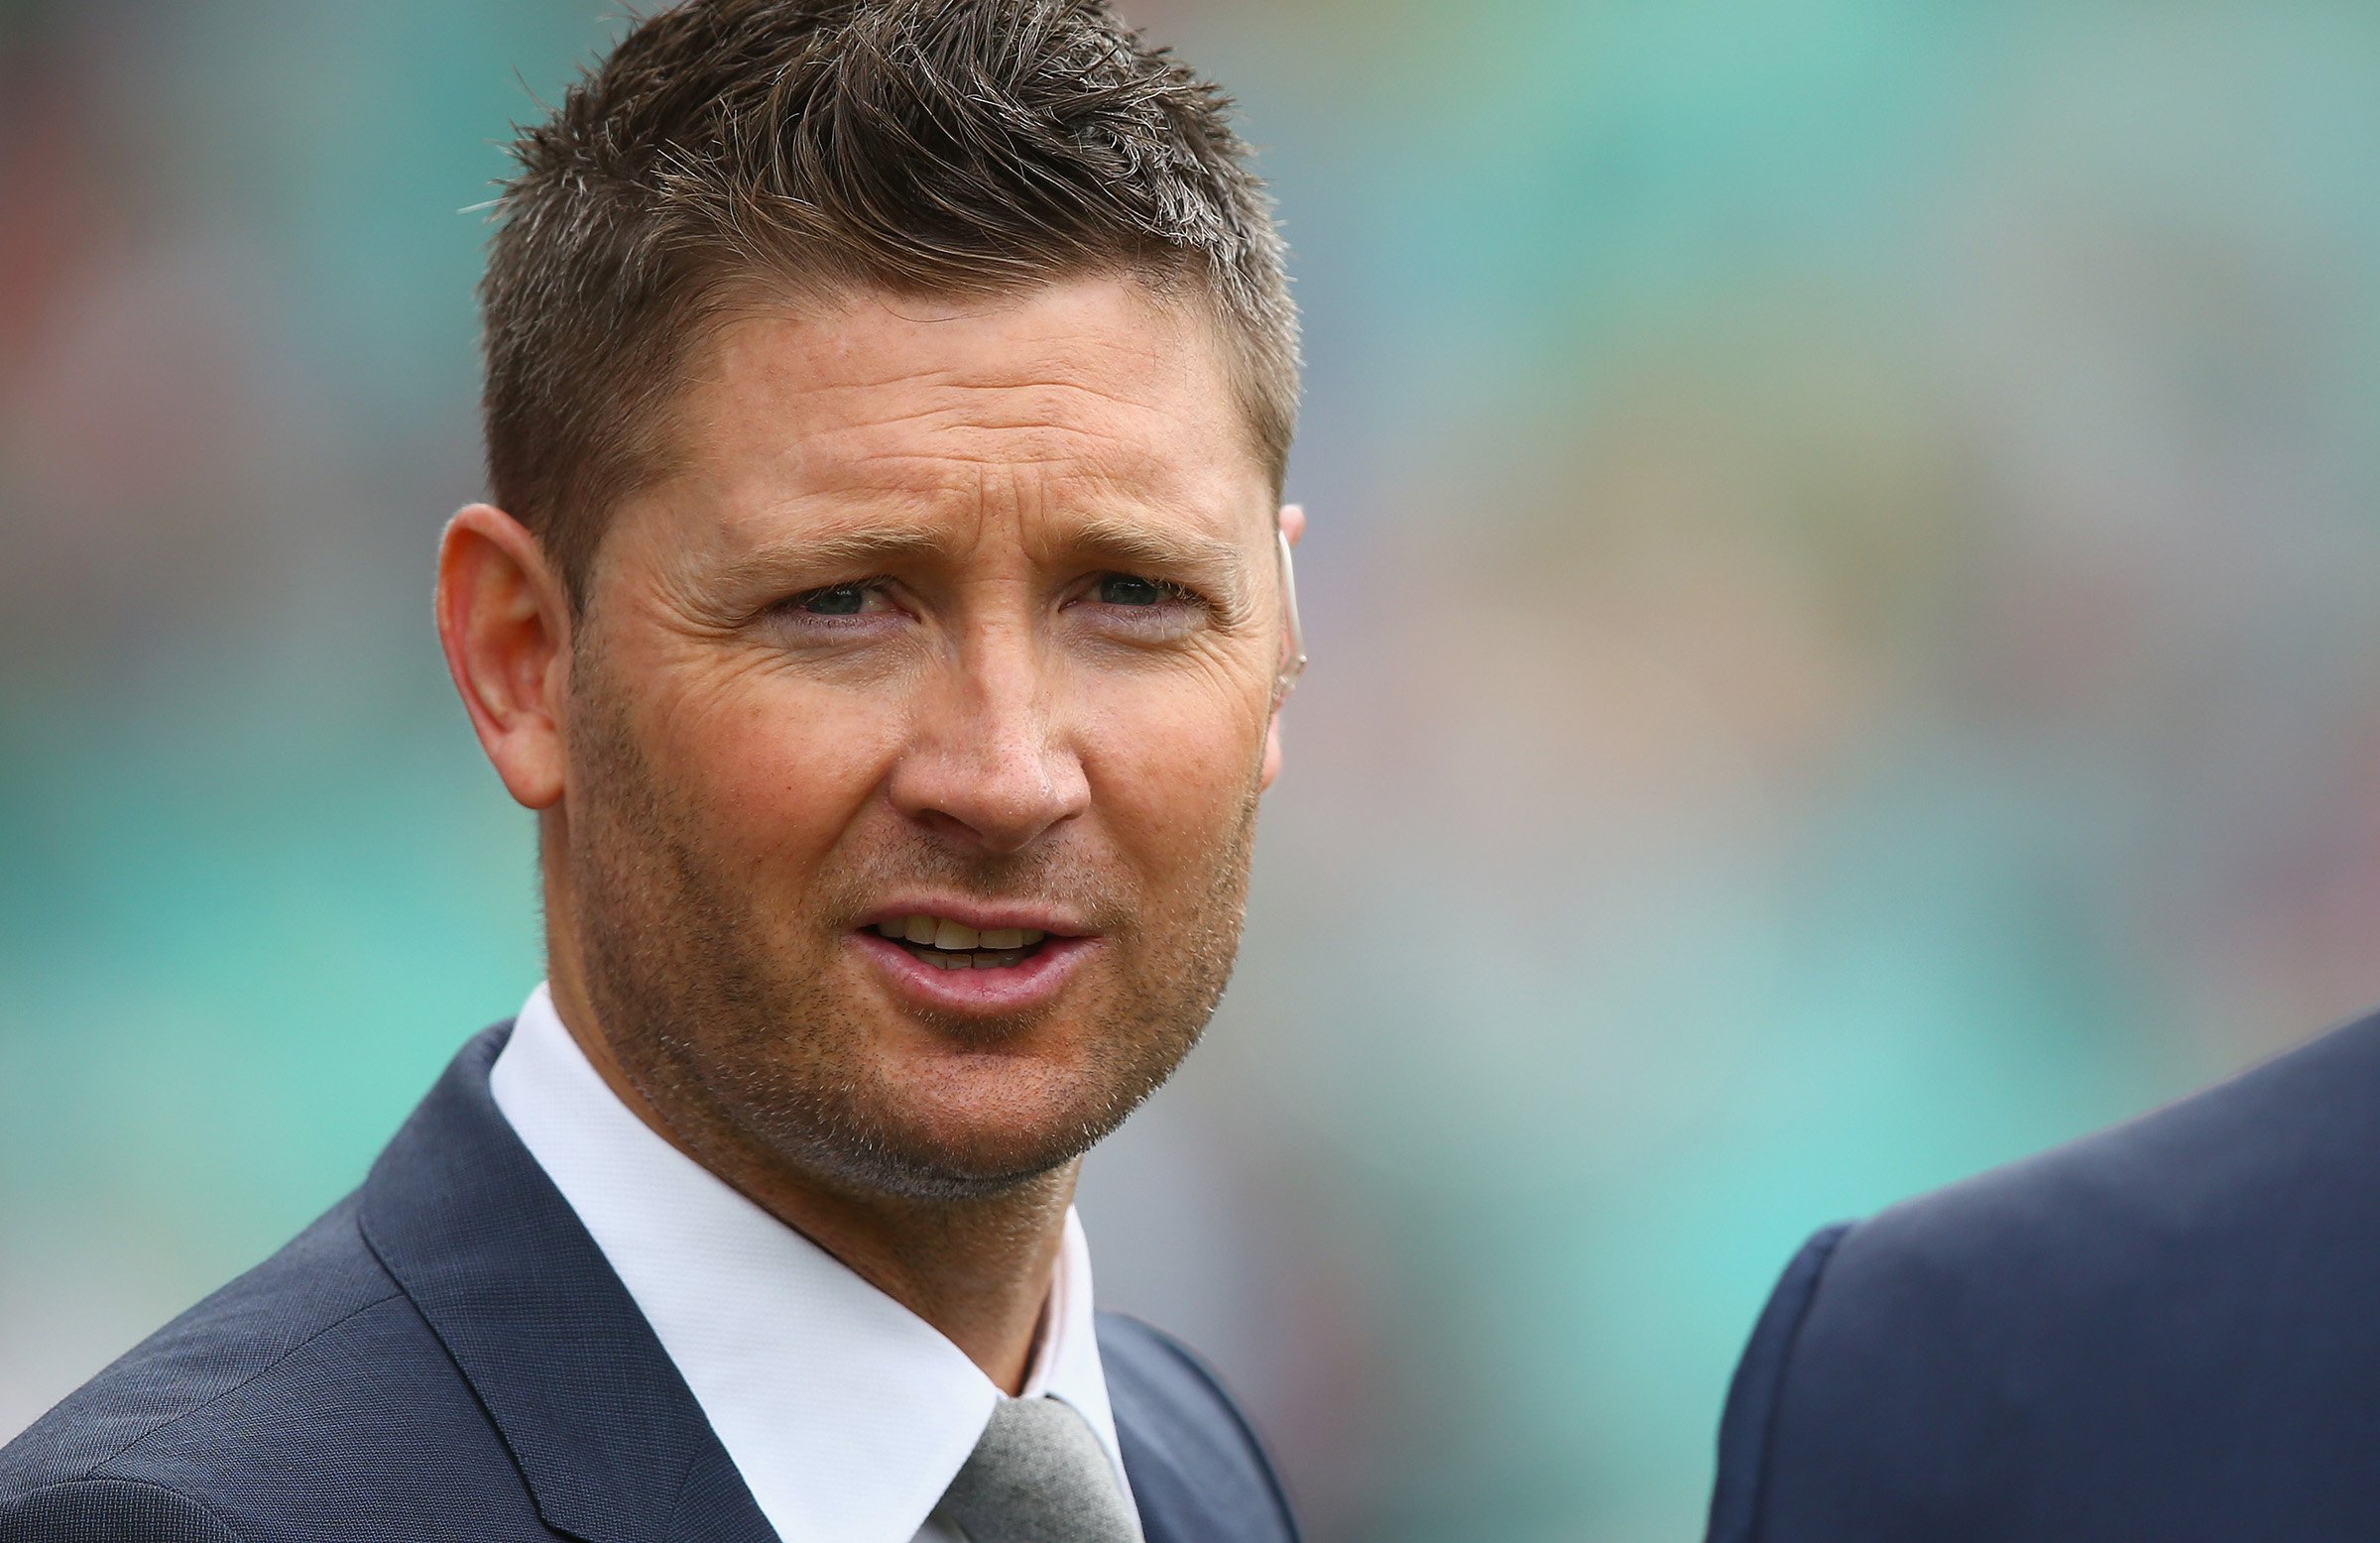 Australia won’t have a captain for 15 years if it is looking for a perfect leader, says Michael Clarke